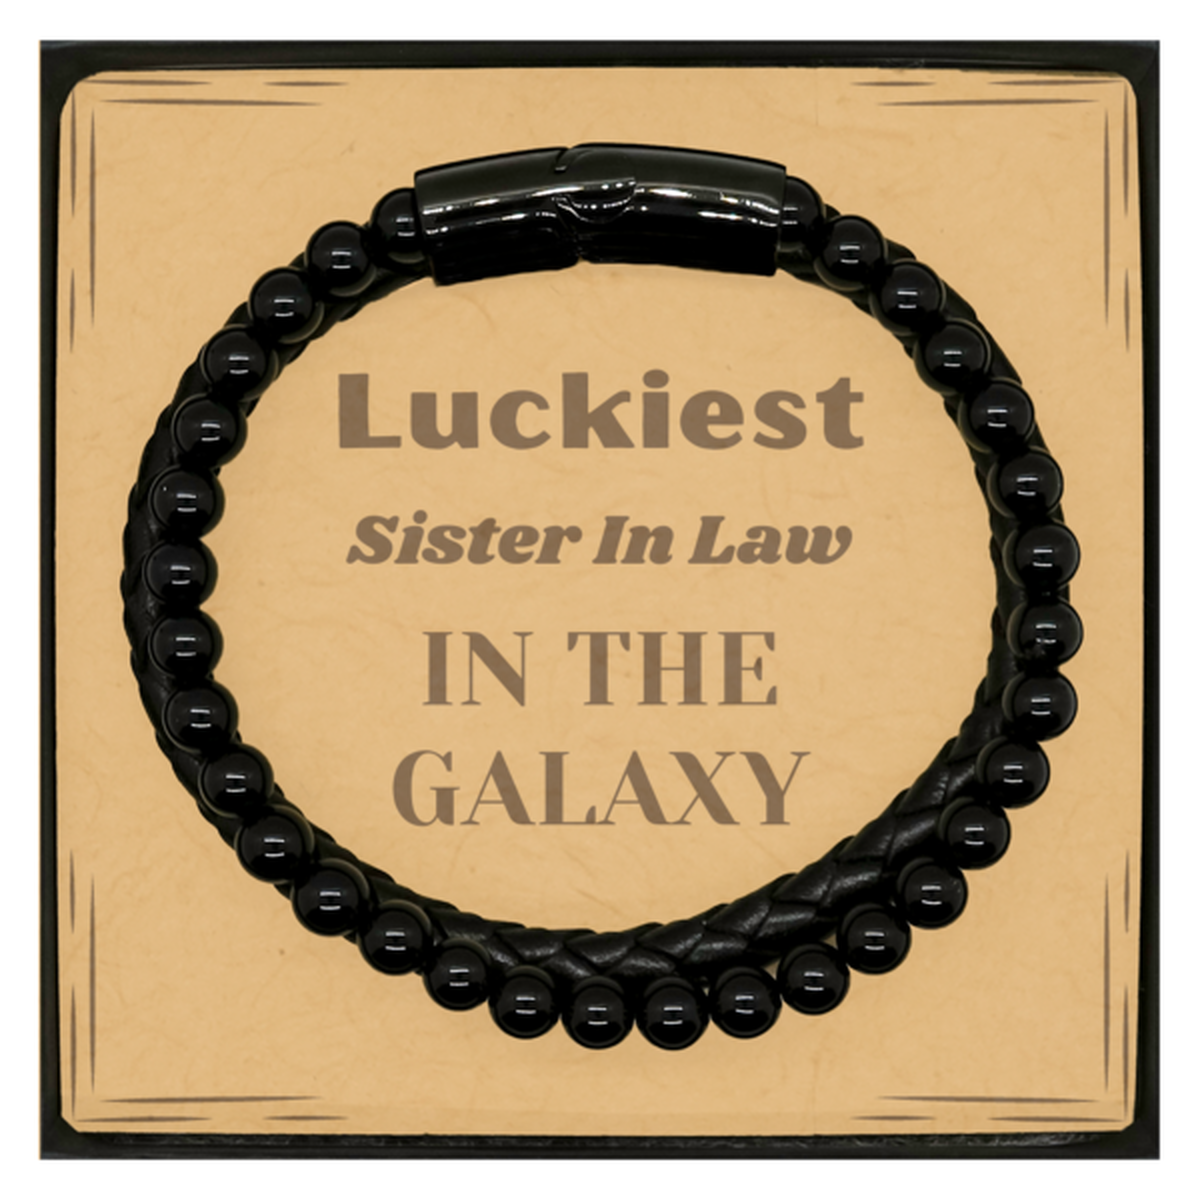 Luckiest Sister In Law in the Galaxy, To My Sister In Law Message Card Gifts, Christmas Sister In Law Stone Leather Bracelets Gifts, X-mas Birthday Unique Gifts For Sister In Law Men Women